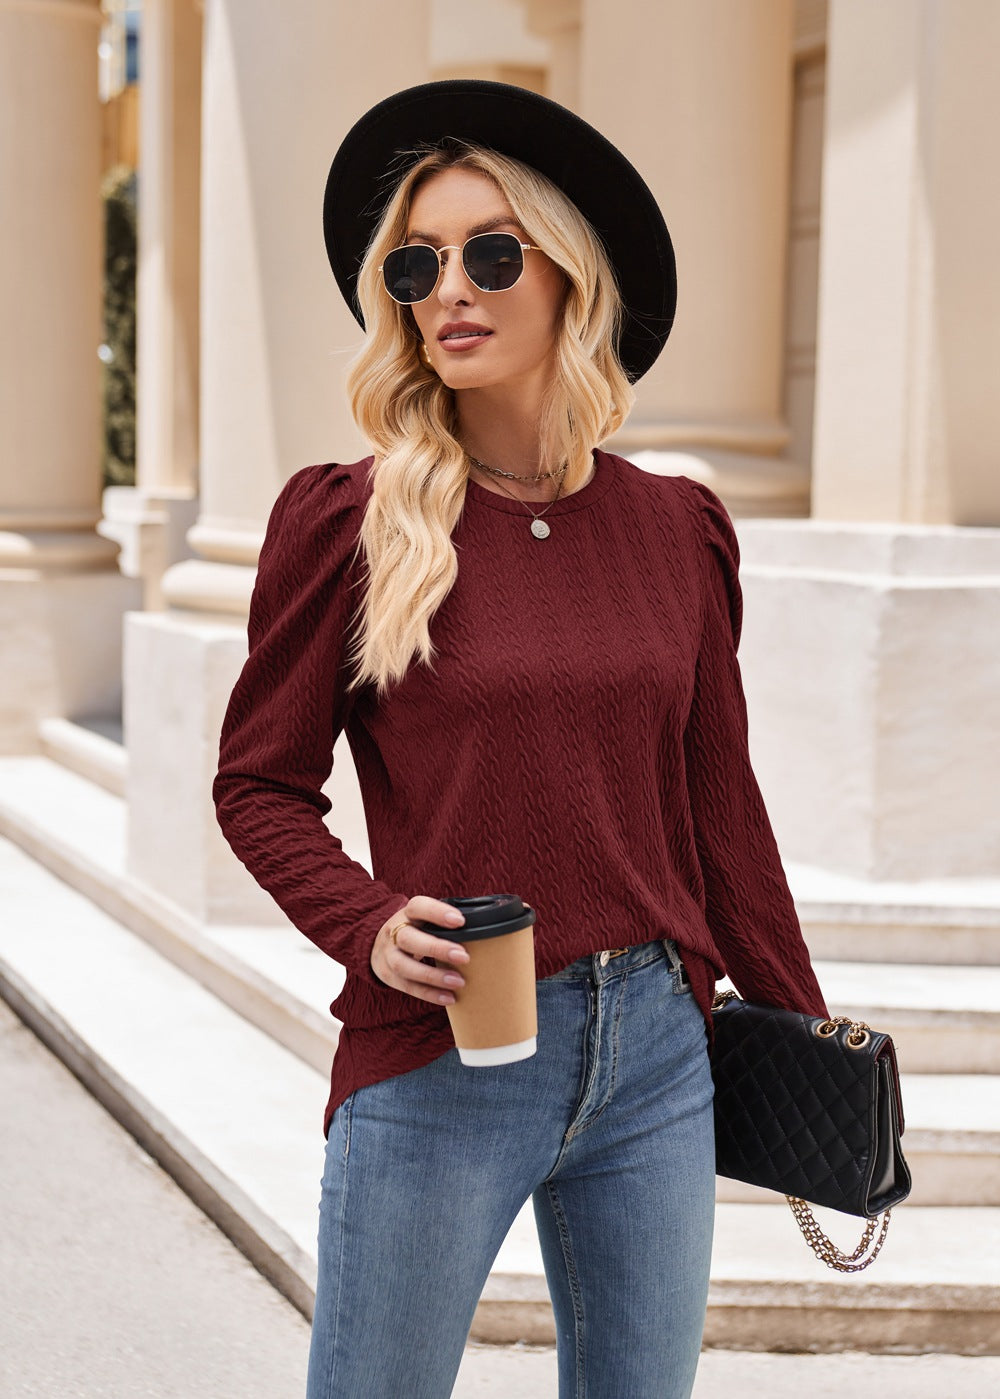 Women round Neck Puff Sleeve Knitted Jacquard Solid Color Top Long Sleeve Twist T shirt